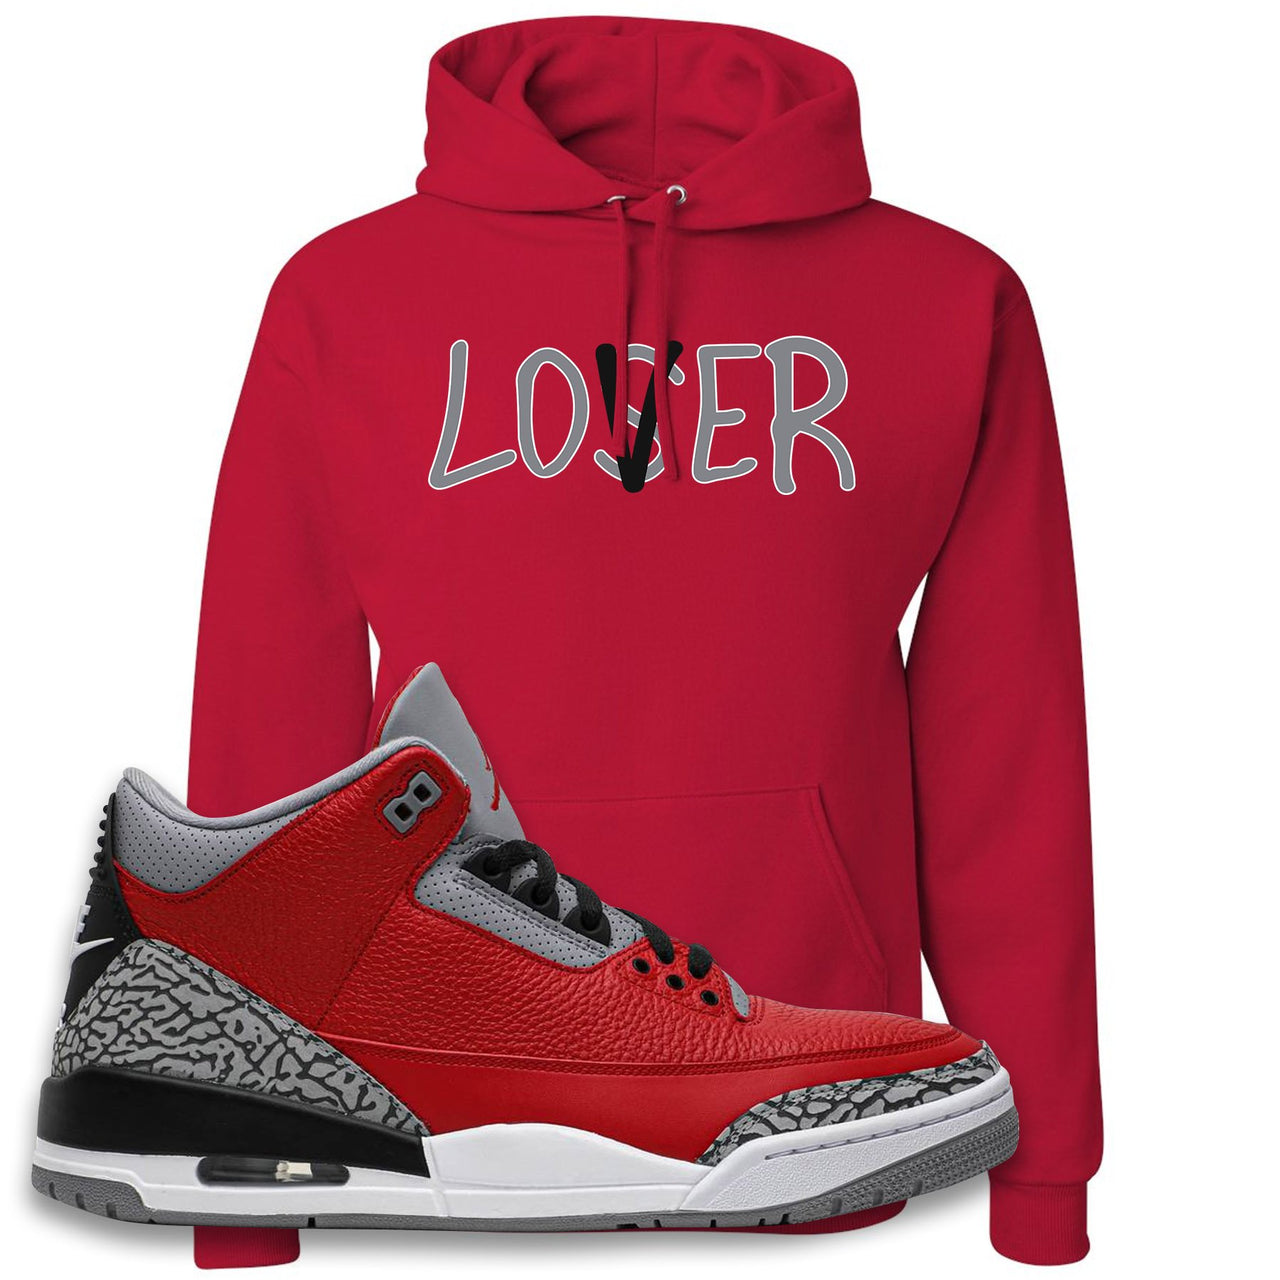 Jordan 3 Red Cement Chicago All-Star Sneaker True Red Pullover Hoodie | Hoodie to match Jordan 3 All Star Red Cement Shoes | Lover